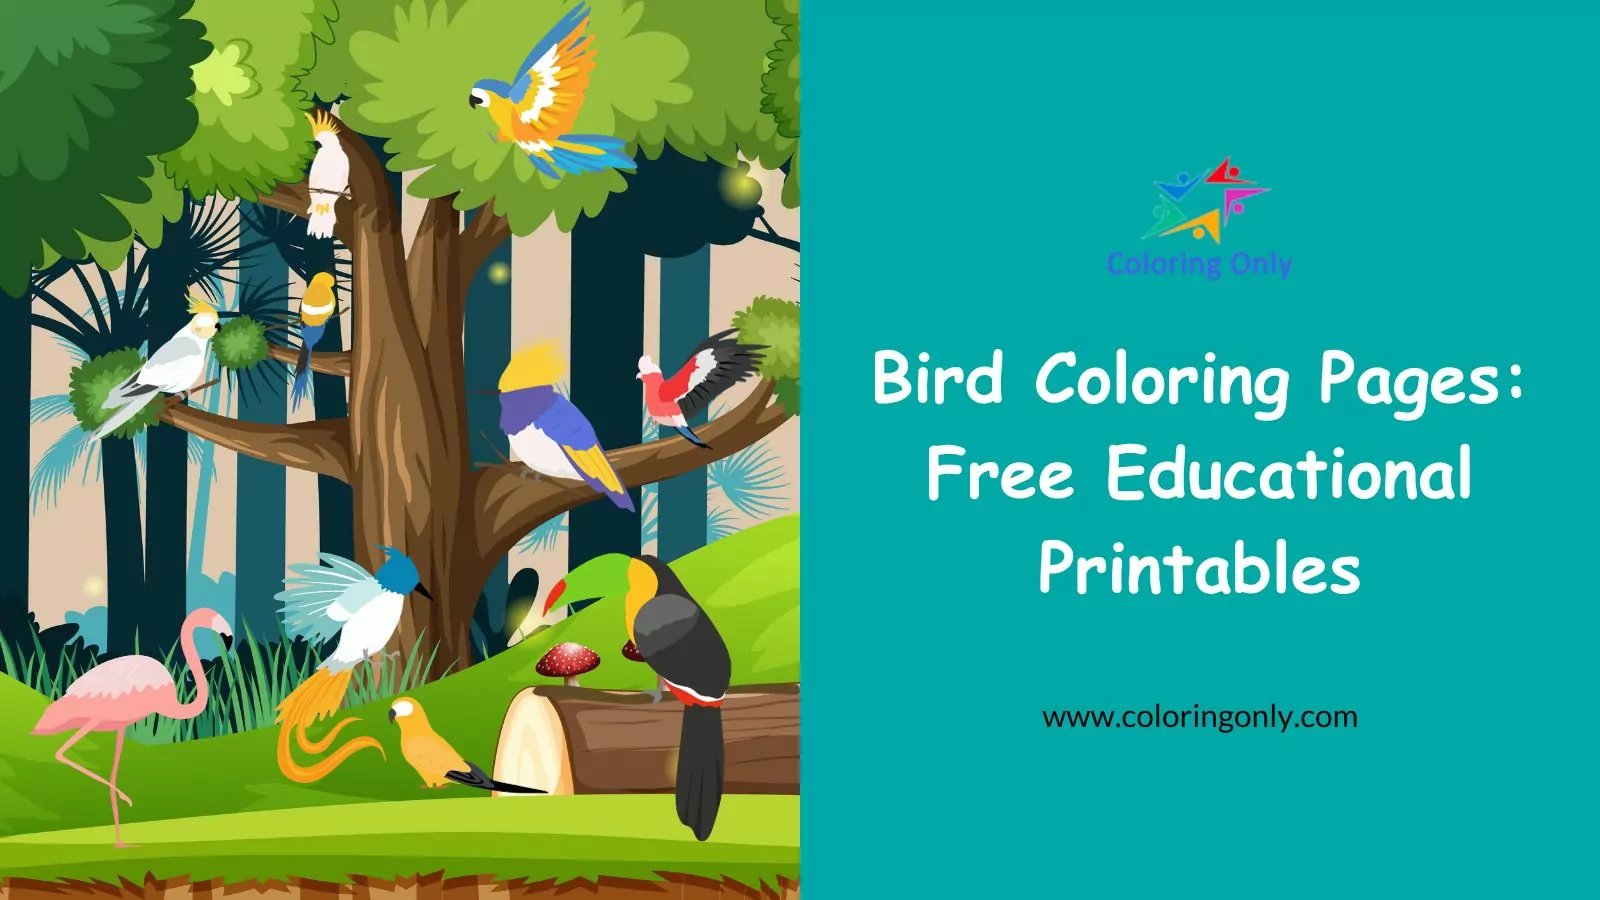 Bird Coloring Pages: Free Educational Printables